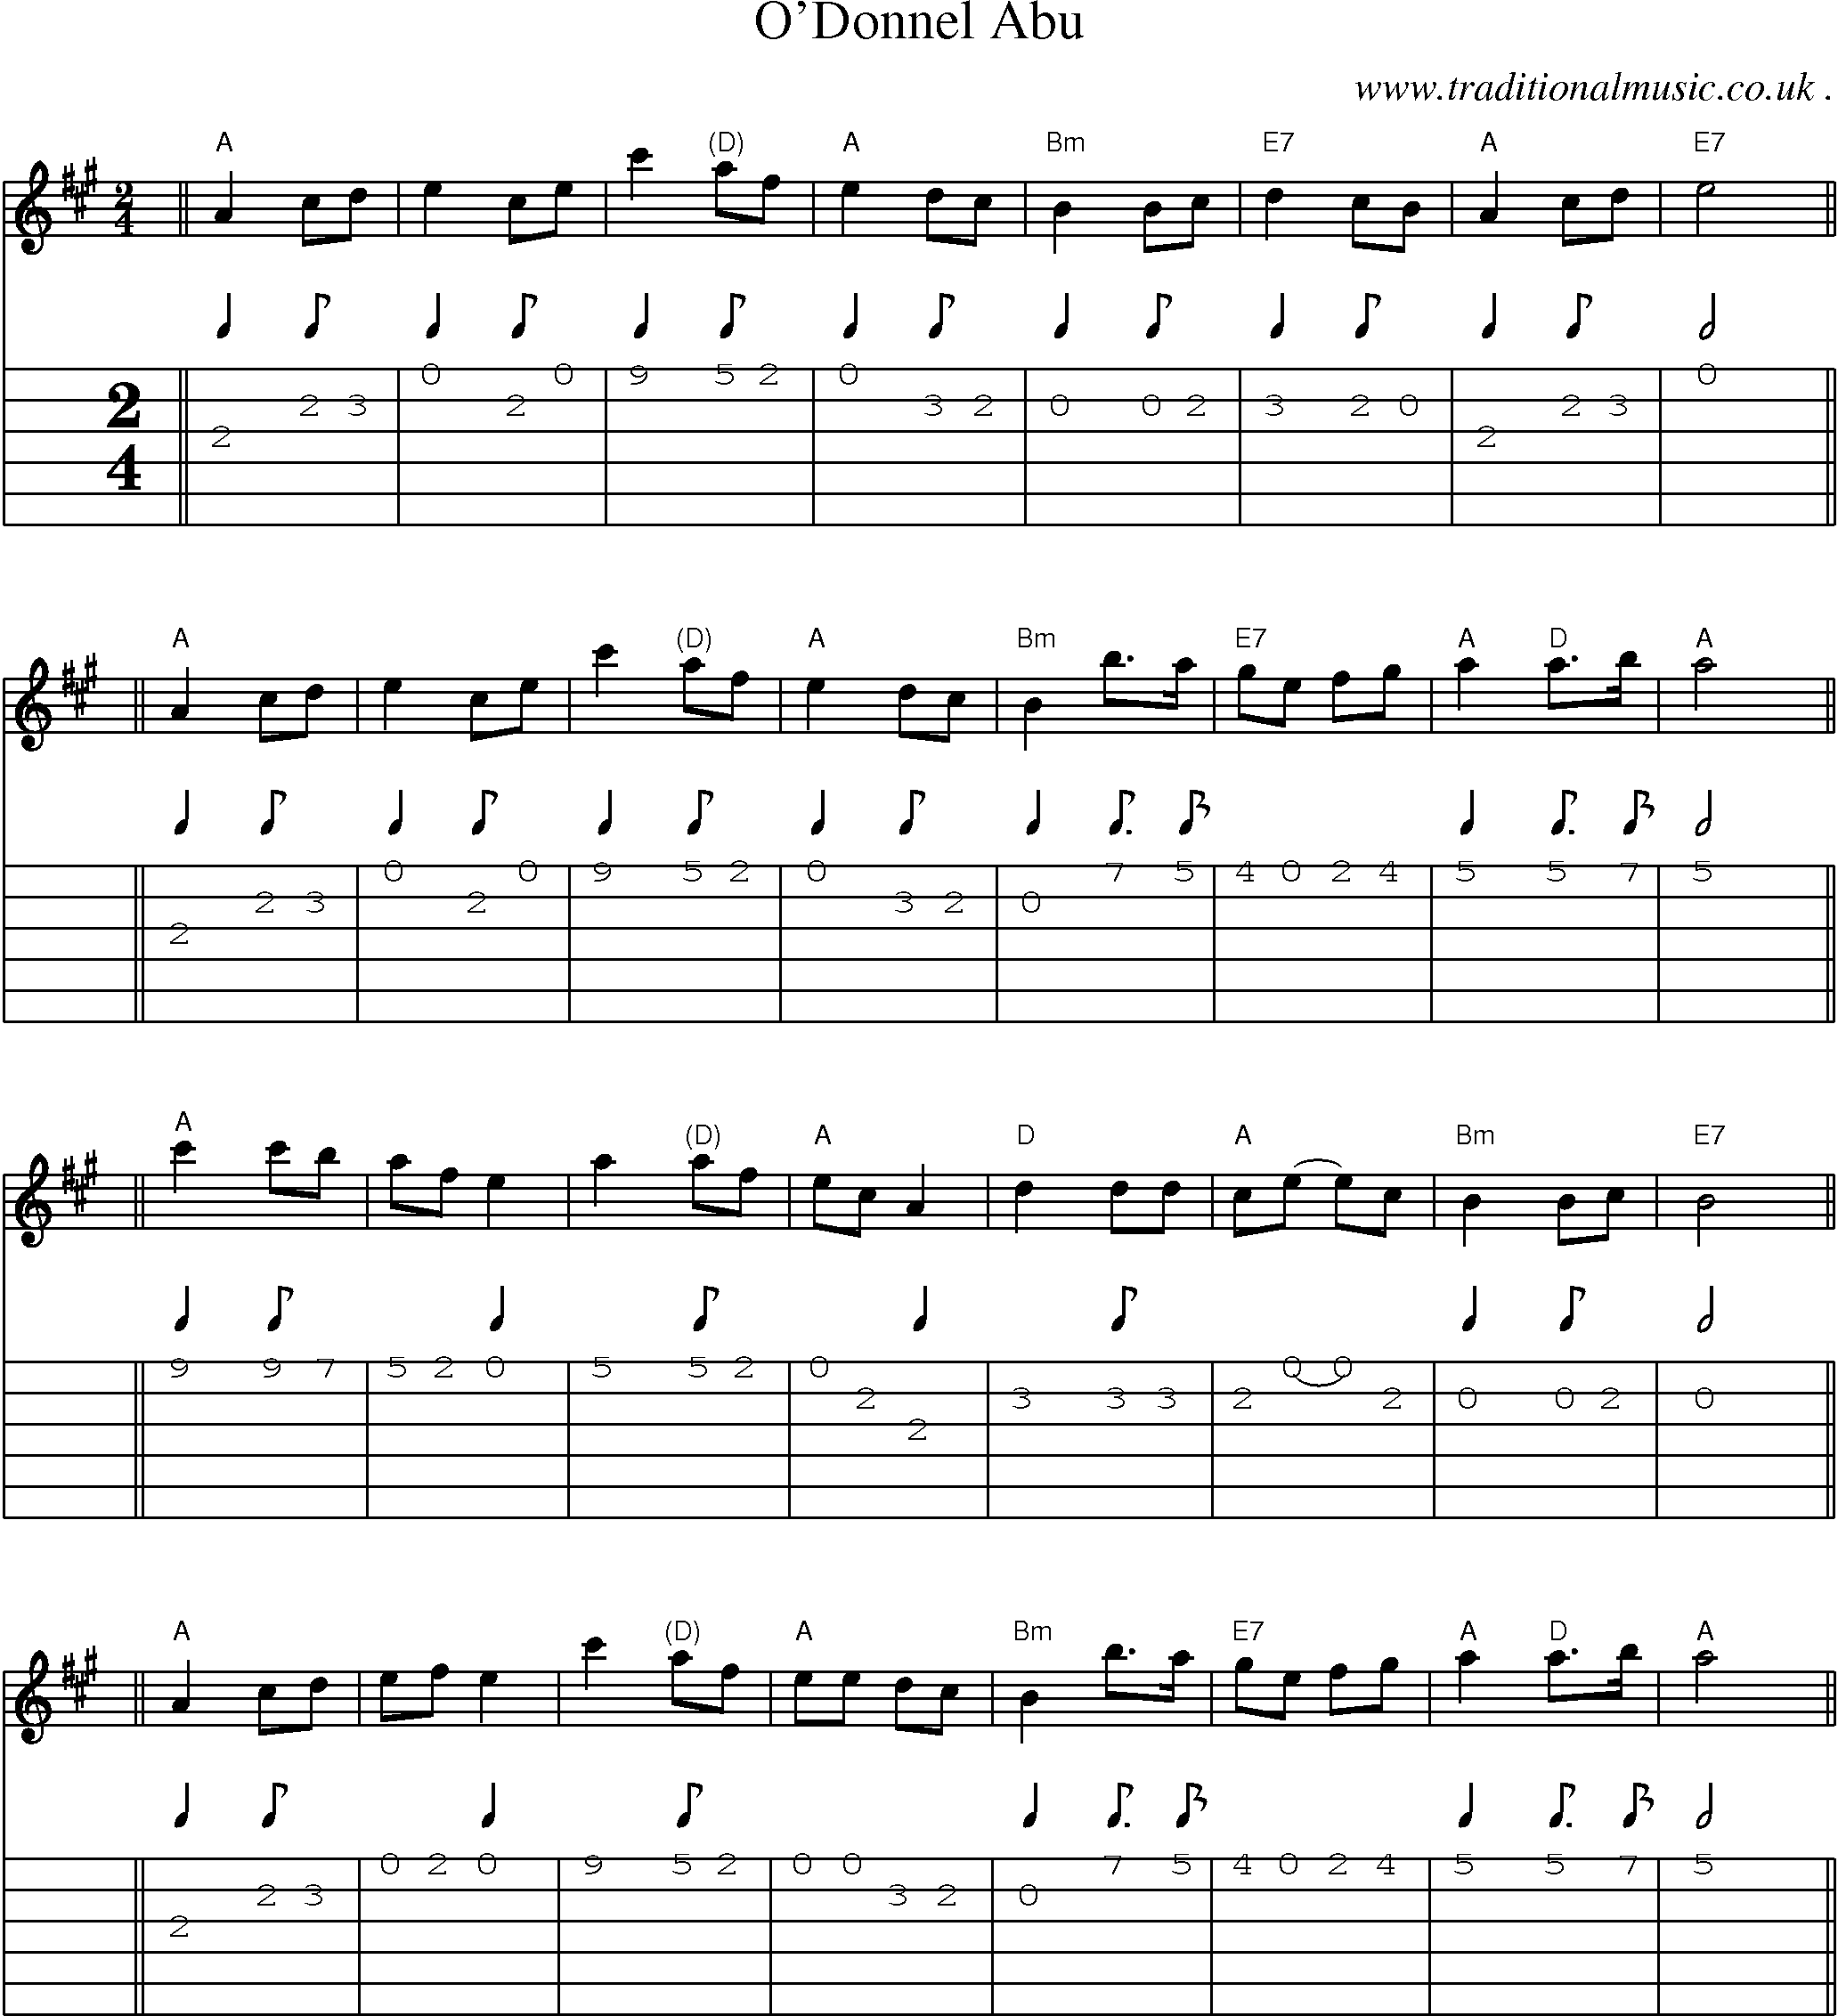 Sheet-Music and Guitar Tabs for Odonnel Abu